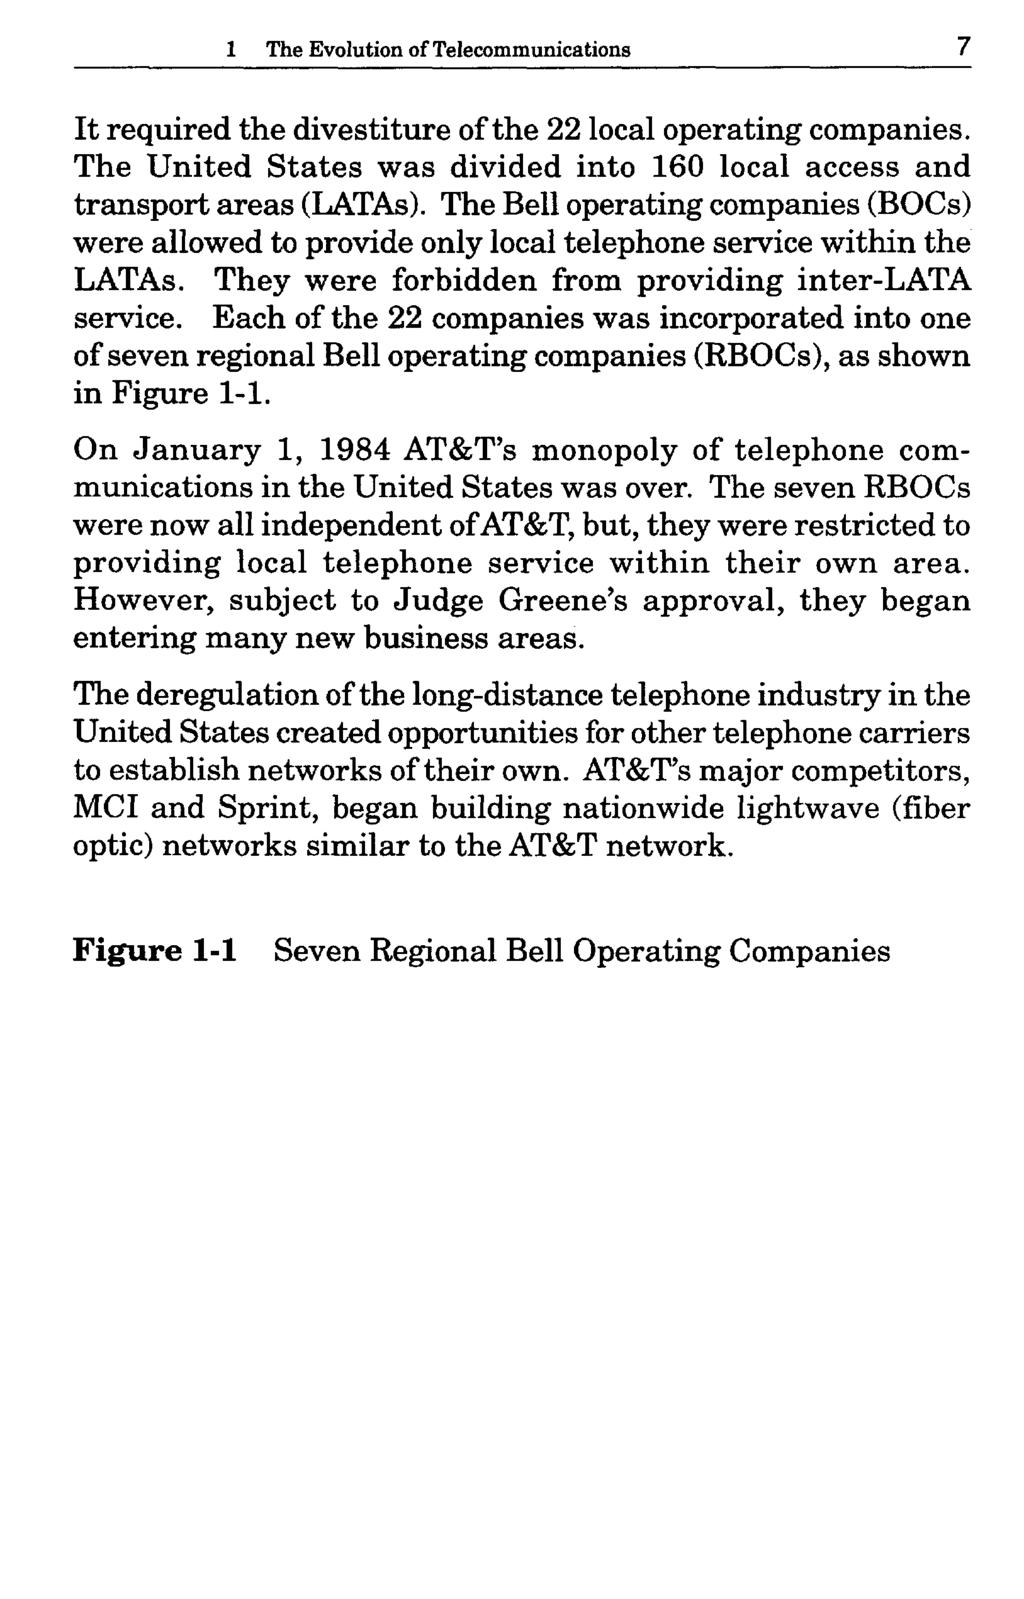 1 The Evolution of Telecommunications 7 It required the divestiture of the 22 local operating companies. The United States was divided into 160 local access and transport areas (LATAs).